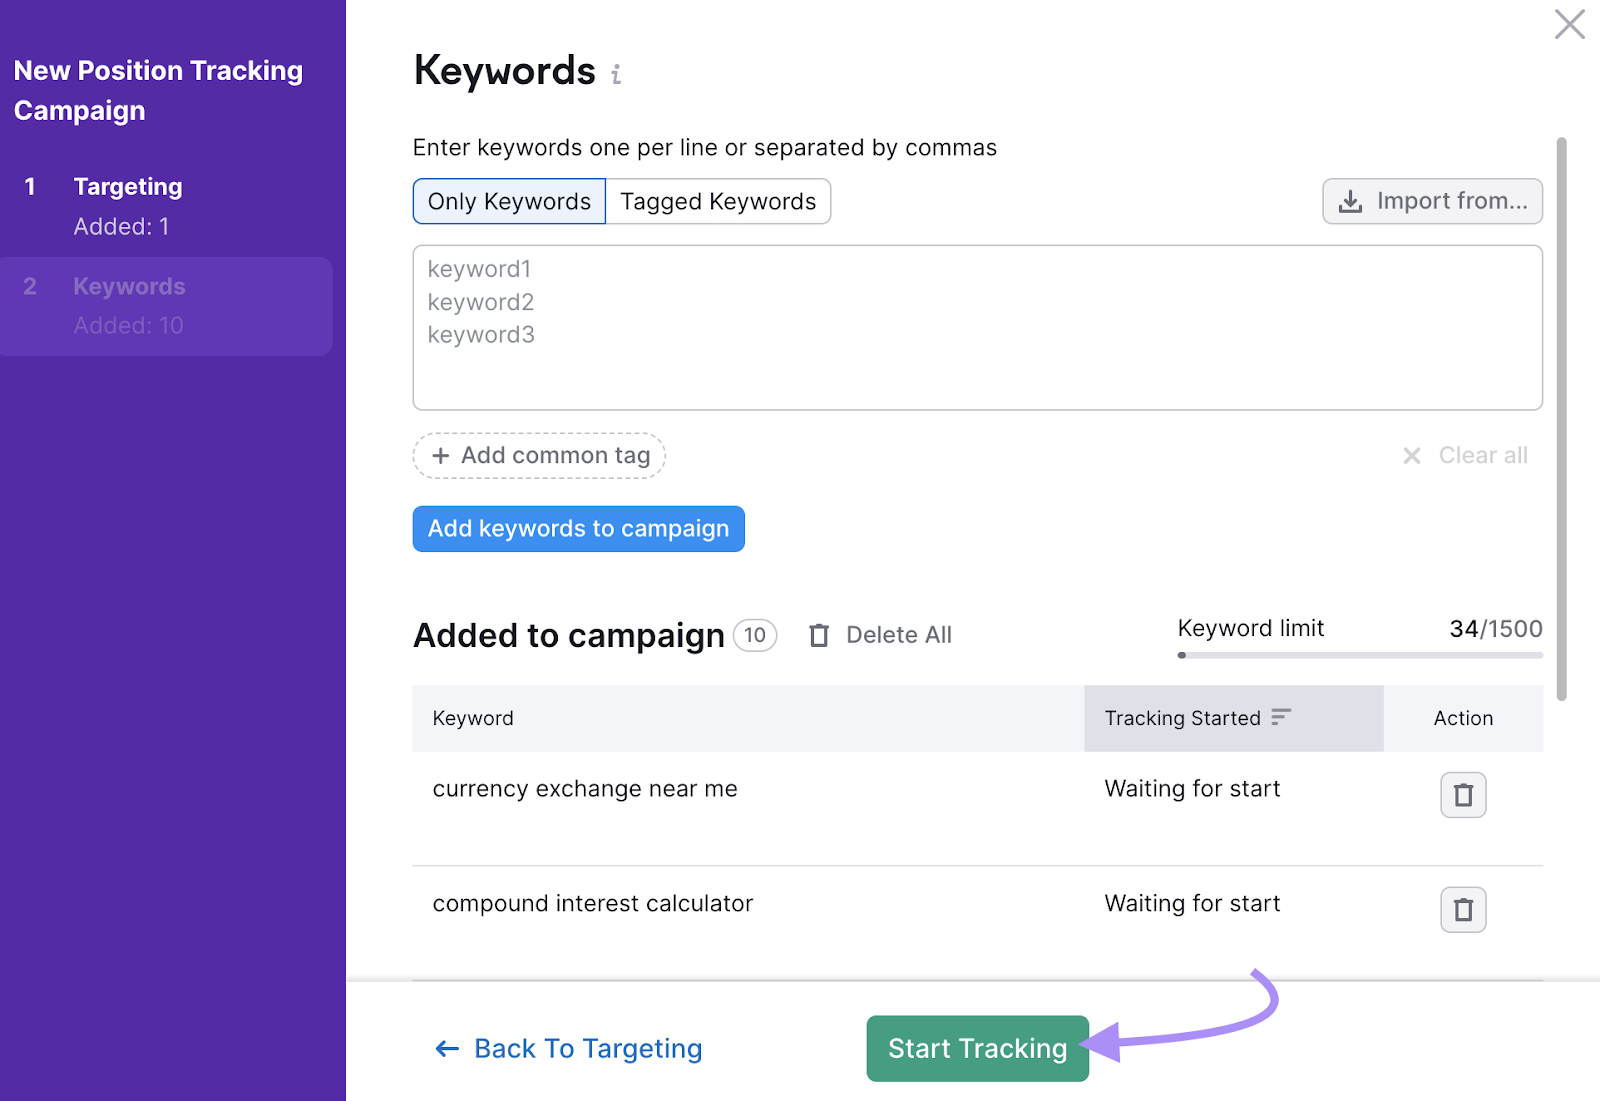 “Start Tracking" button selected in the "Keywords" window